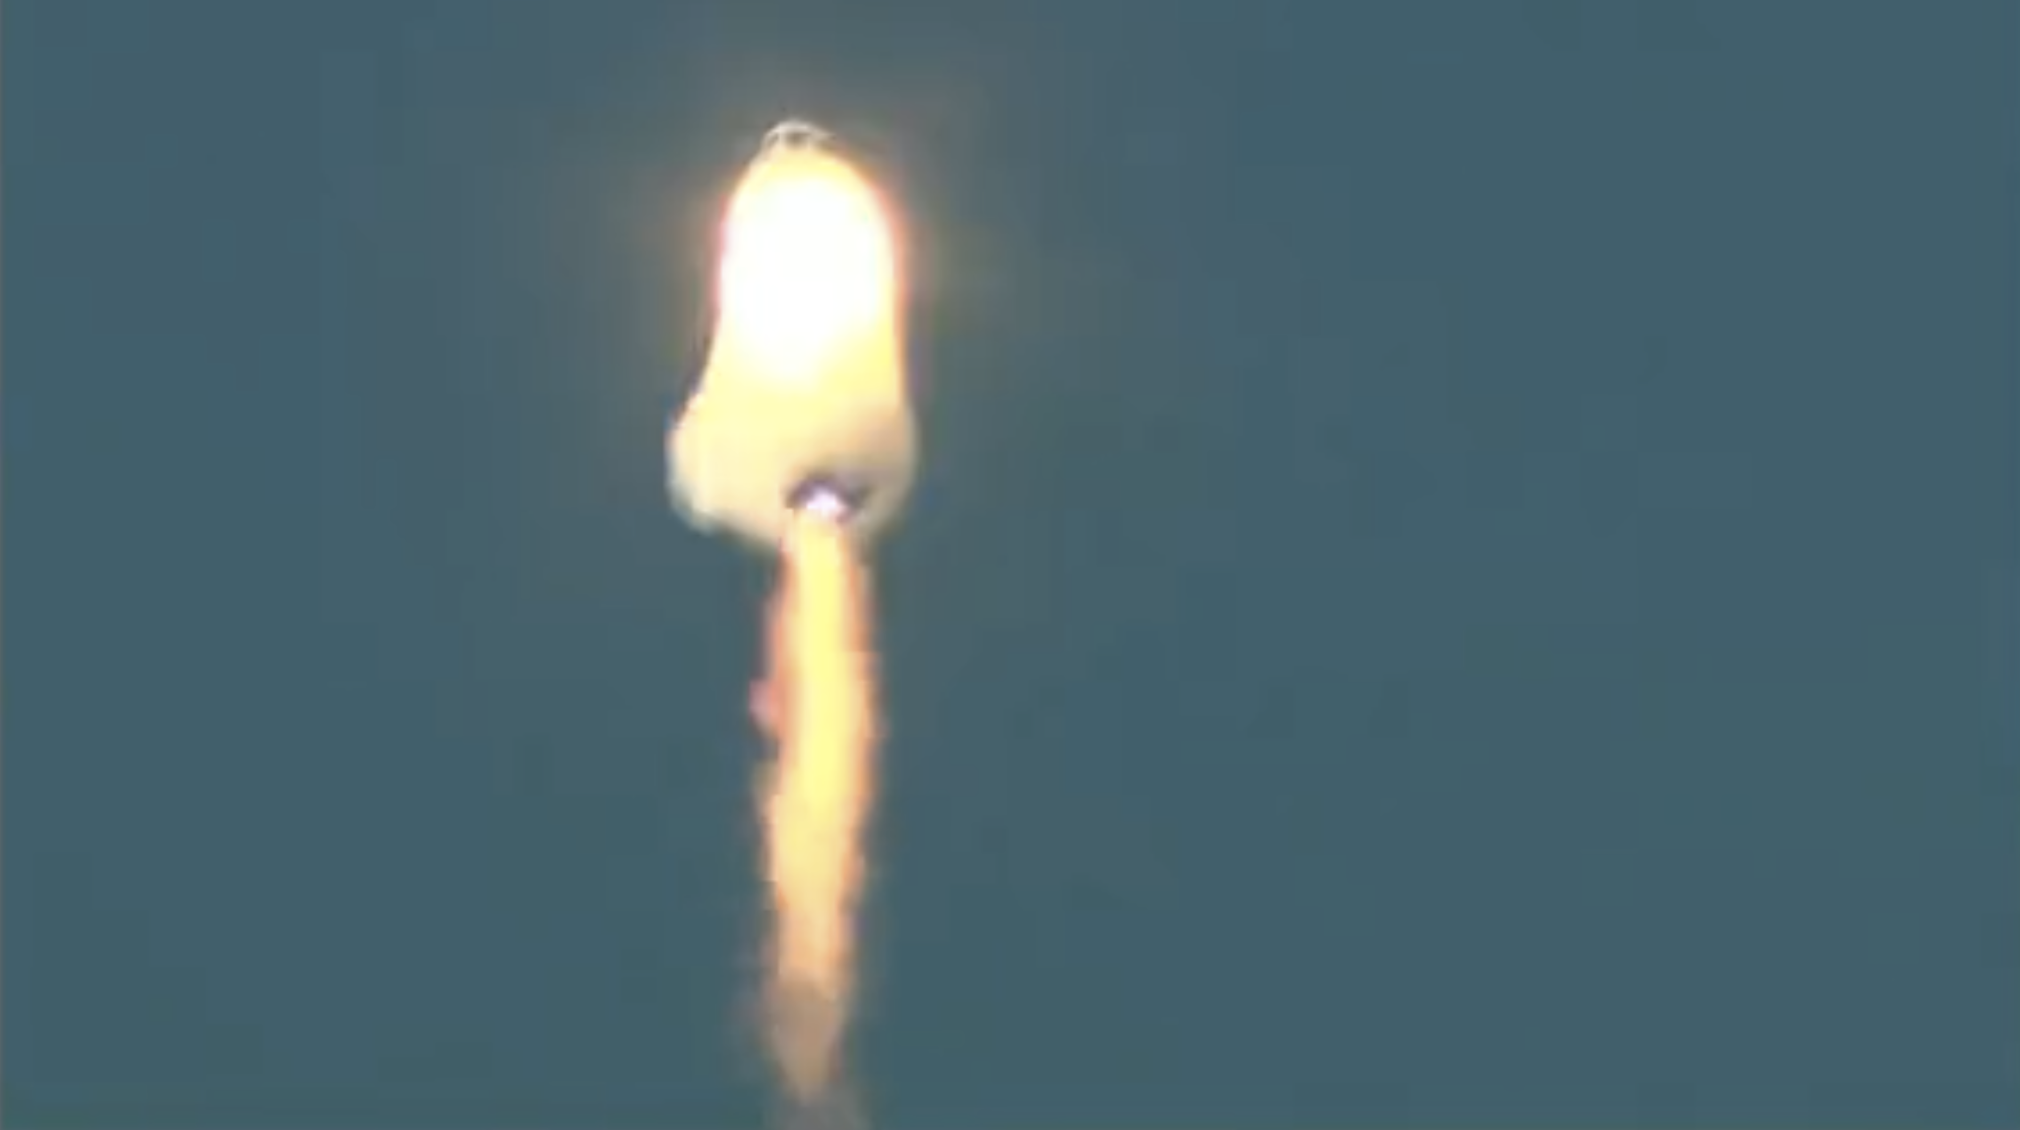 During the September 12 flight, New Shepard appeared to be completely enveloped in flame, prior to the capsule ejecting from the launch vehicle. (Screenshot: Blue Origin)